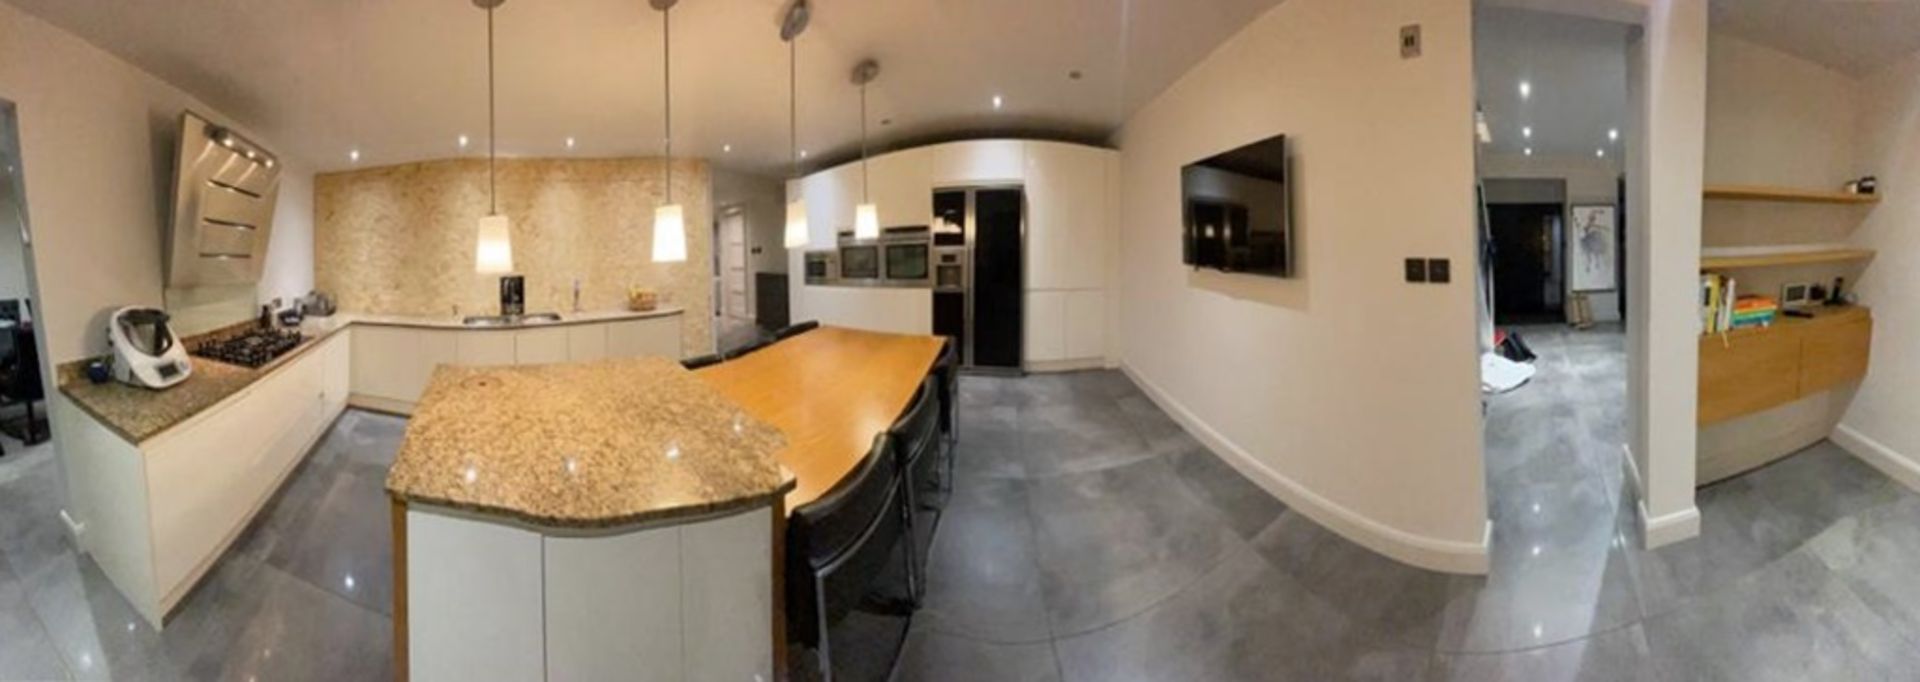 1 x Stunning PARAPAN Handleless Fitted Kitchen with Neff Appliances, Granite Worktops & Island - Image 104 of 126